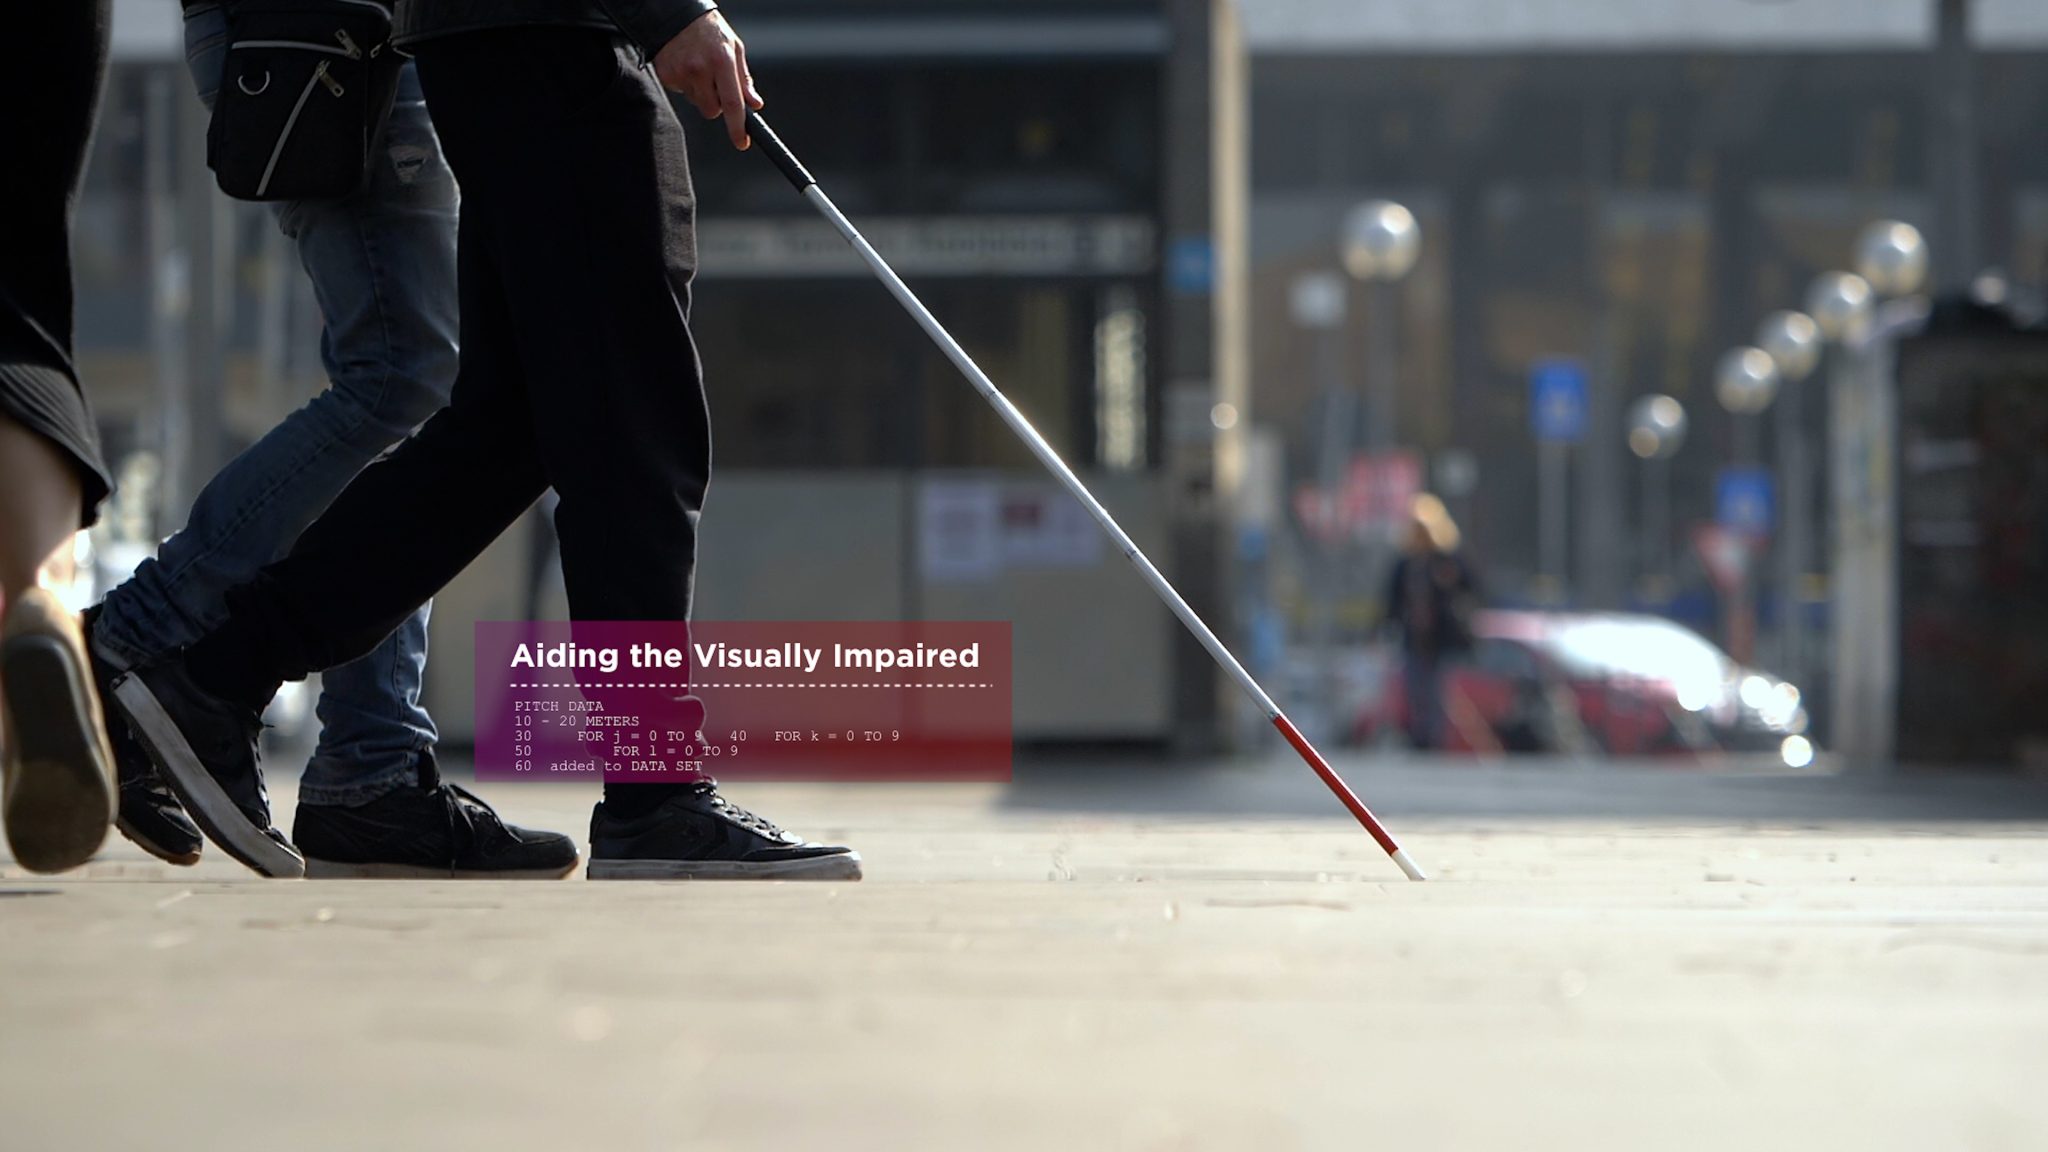 Low shot of someone using a cane to walk on a city sidewalk